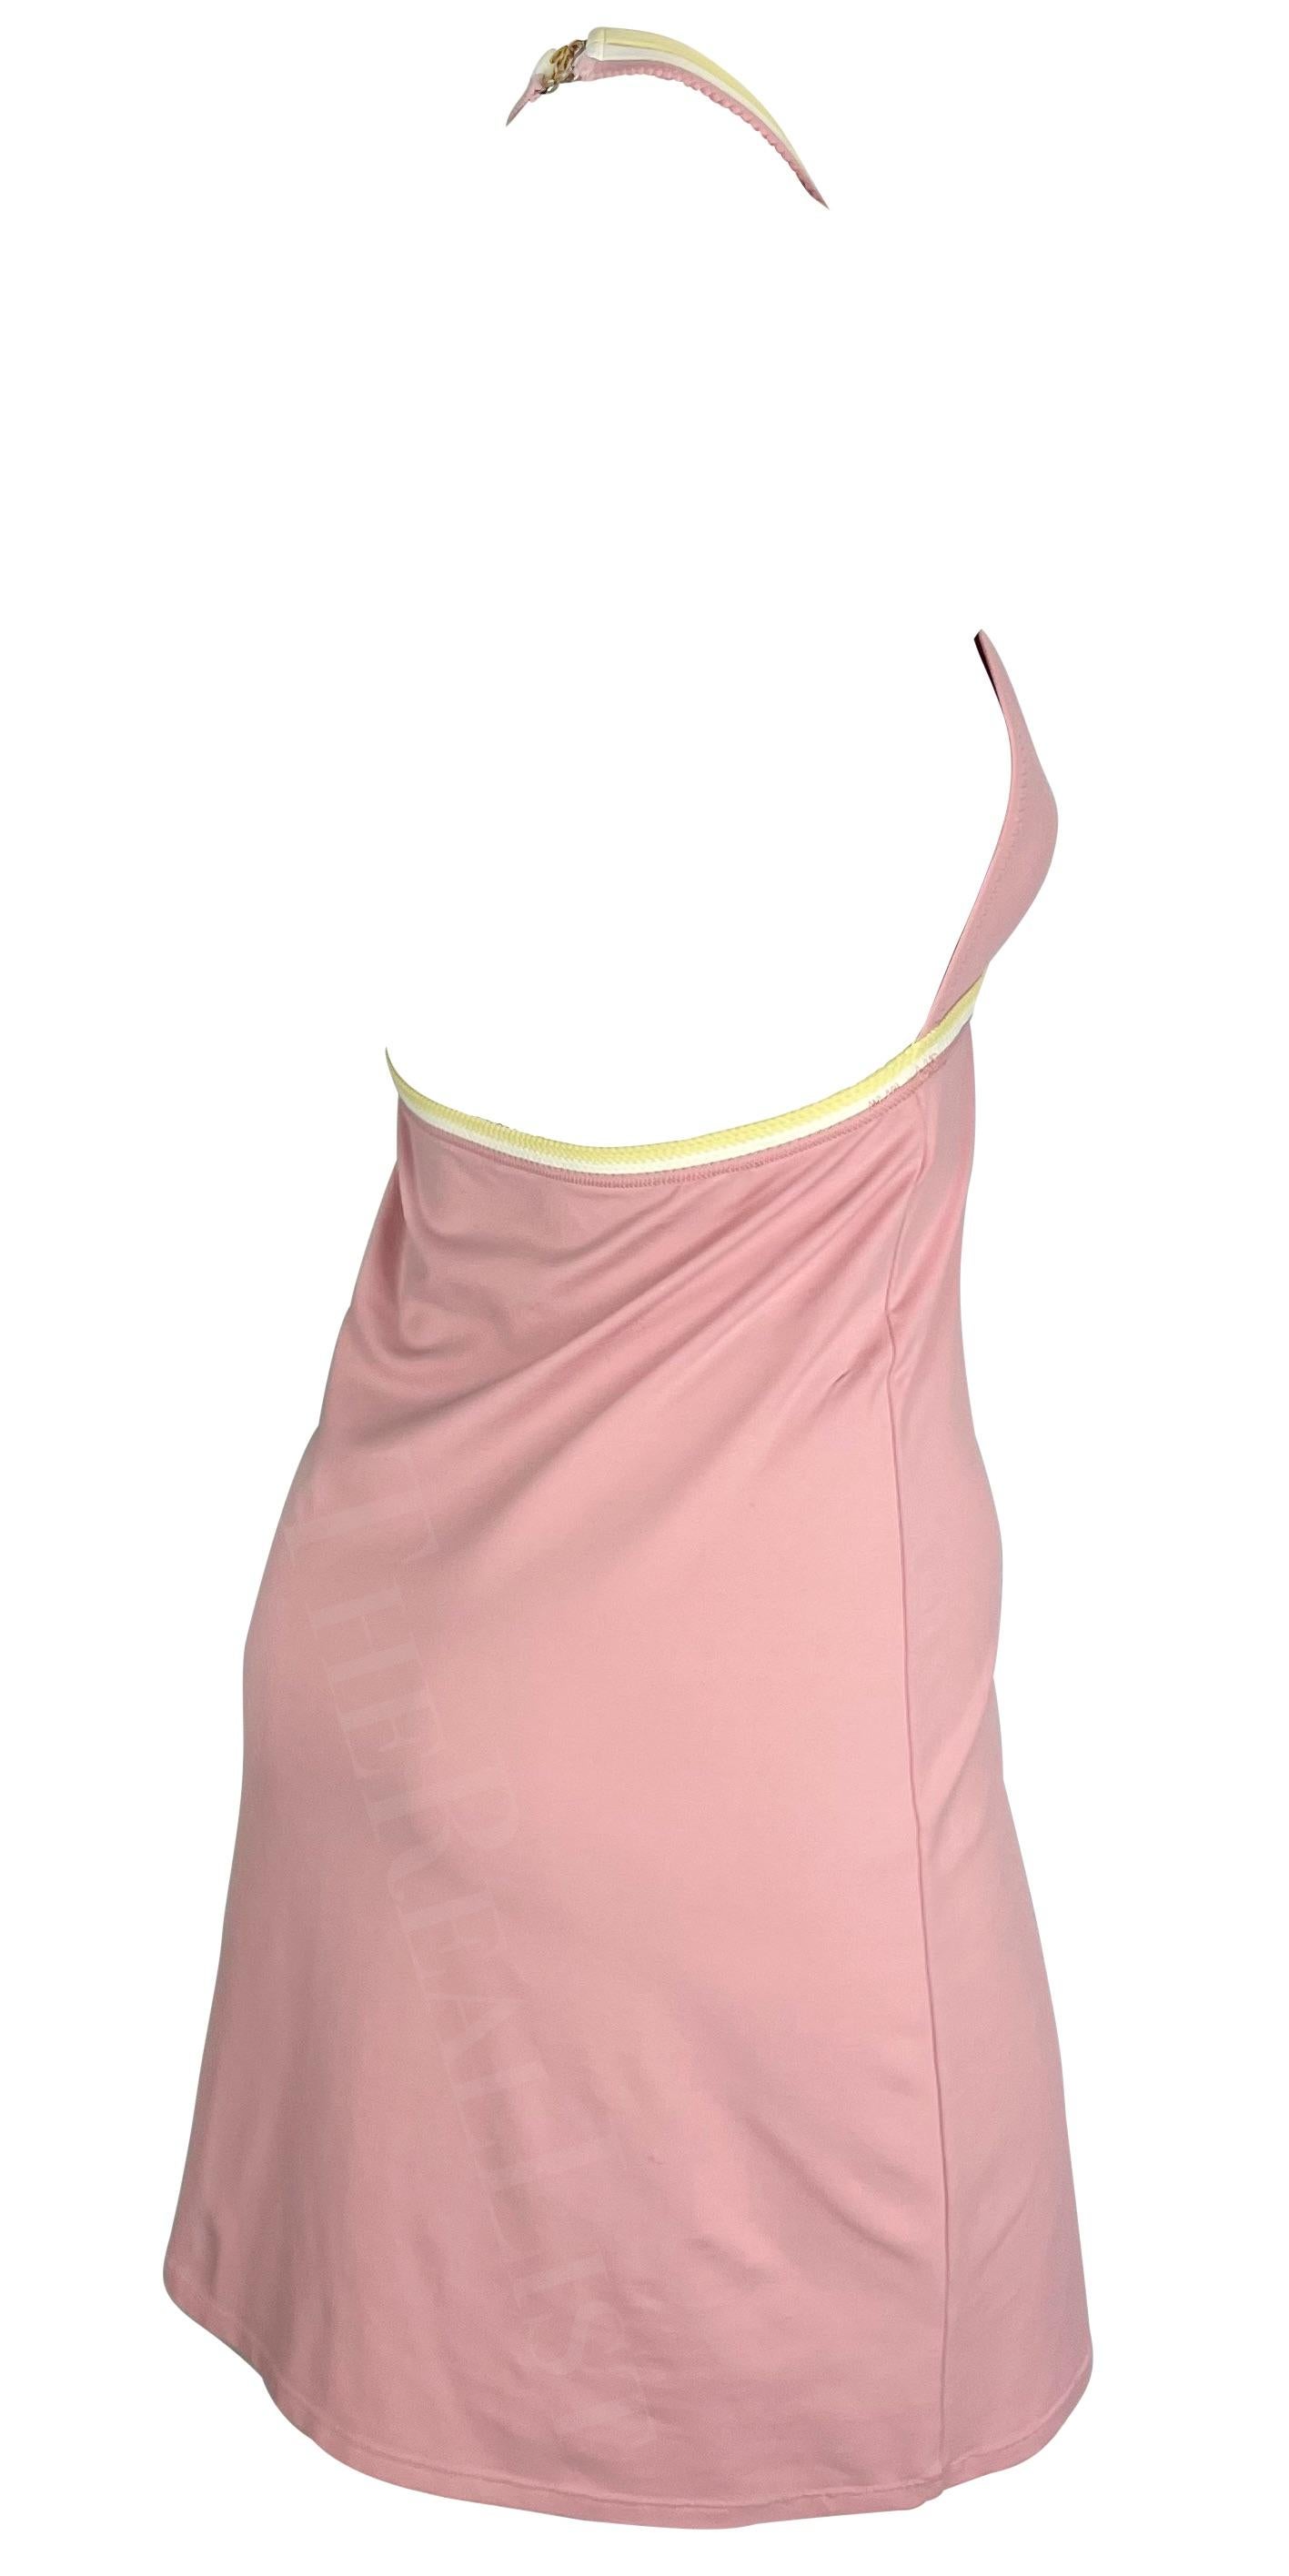 2004 Cruise Chanel by Karl Lagerfeld Pink Bodycon Halterneck Mini Dress For Sale 1